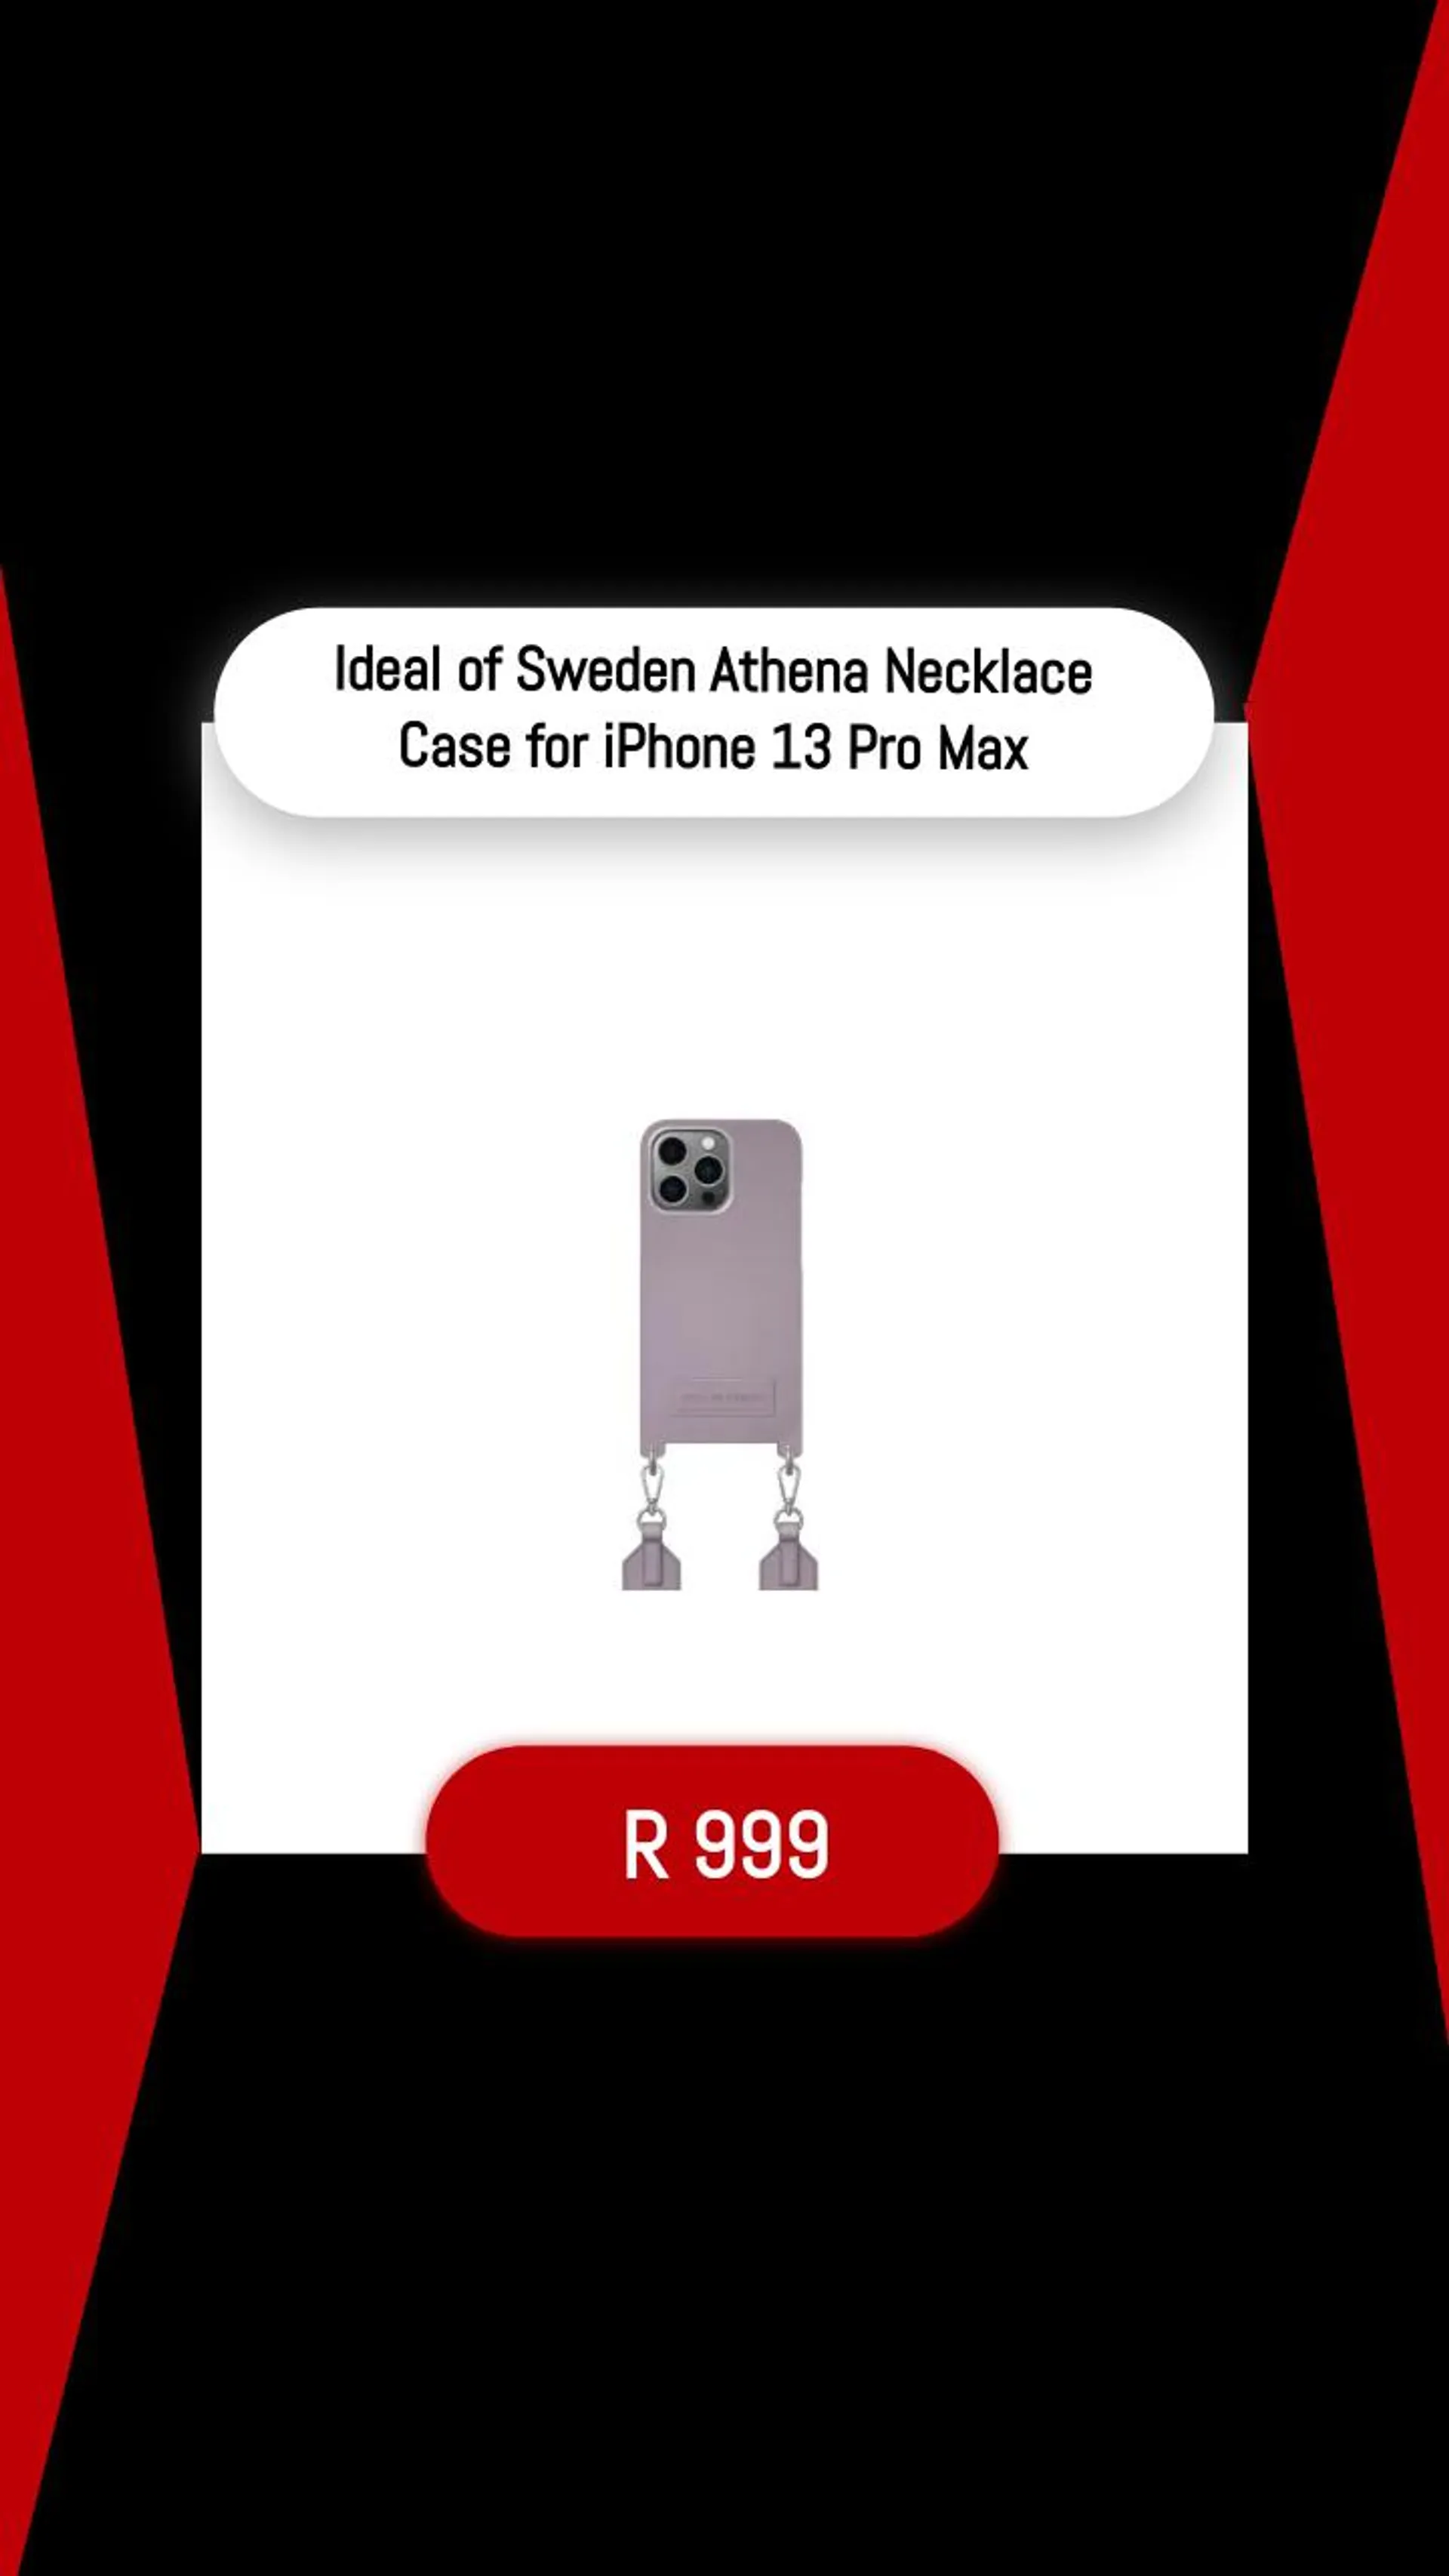 Ideal of Sweden Athena Necklace Case for iPhone 13 Pro Max